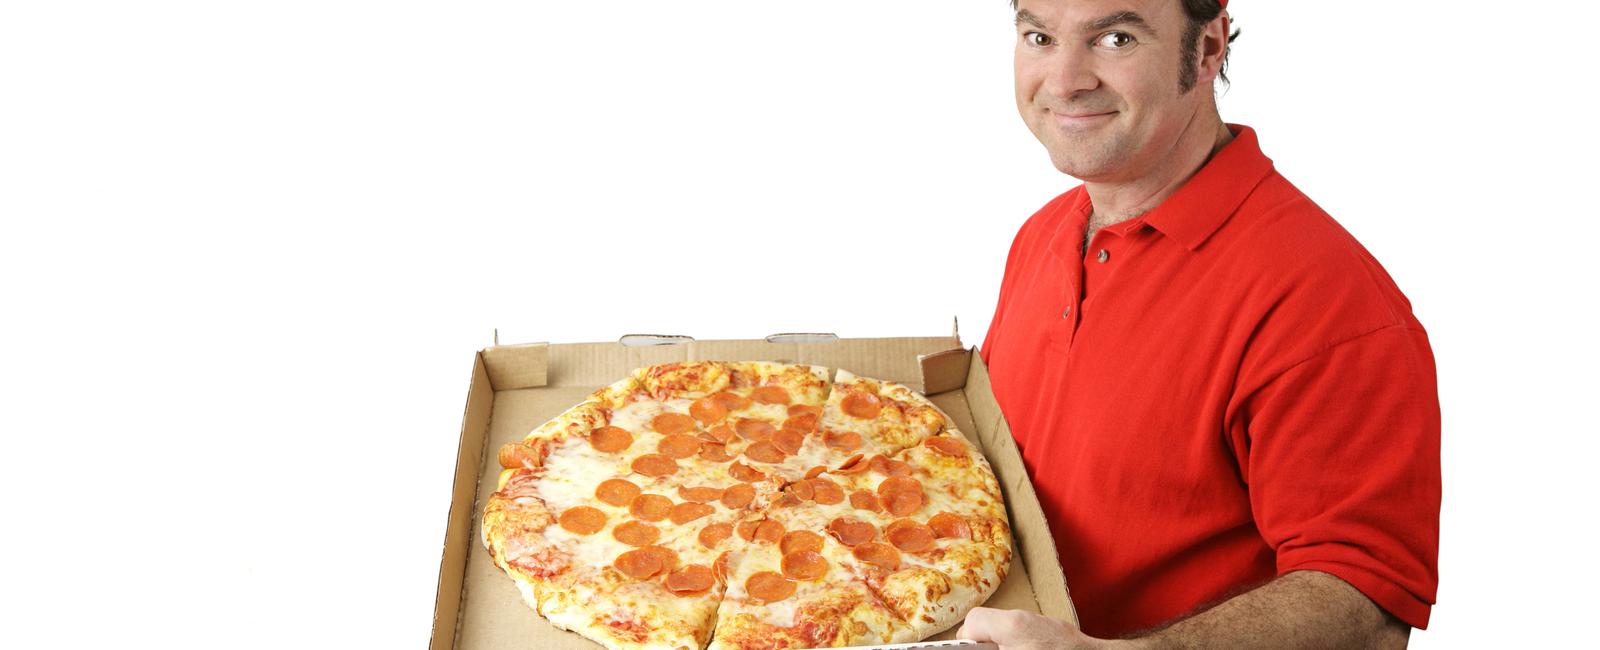 Sending someone a surprise delivery pizza is illegal in louisiana